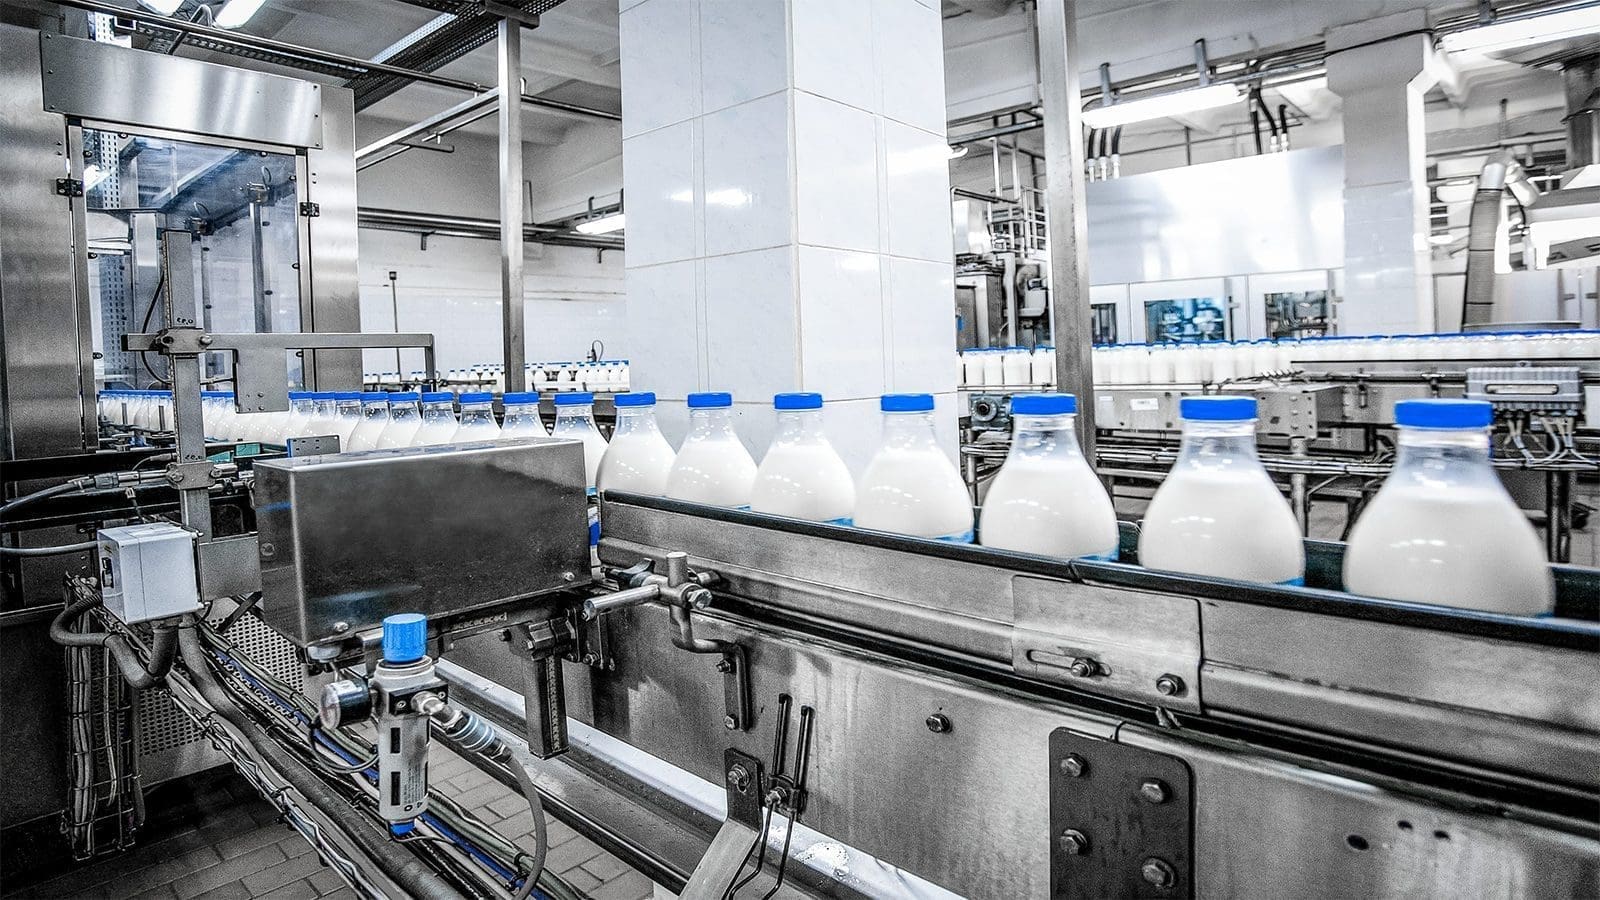 Researchers look to identify bacteria present in dairy processing environments